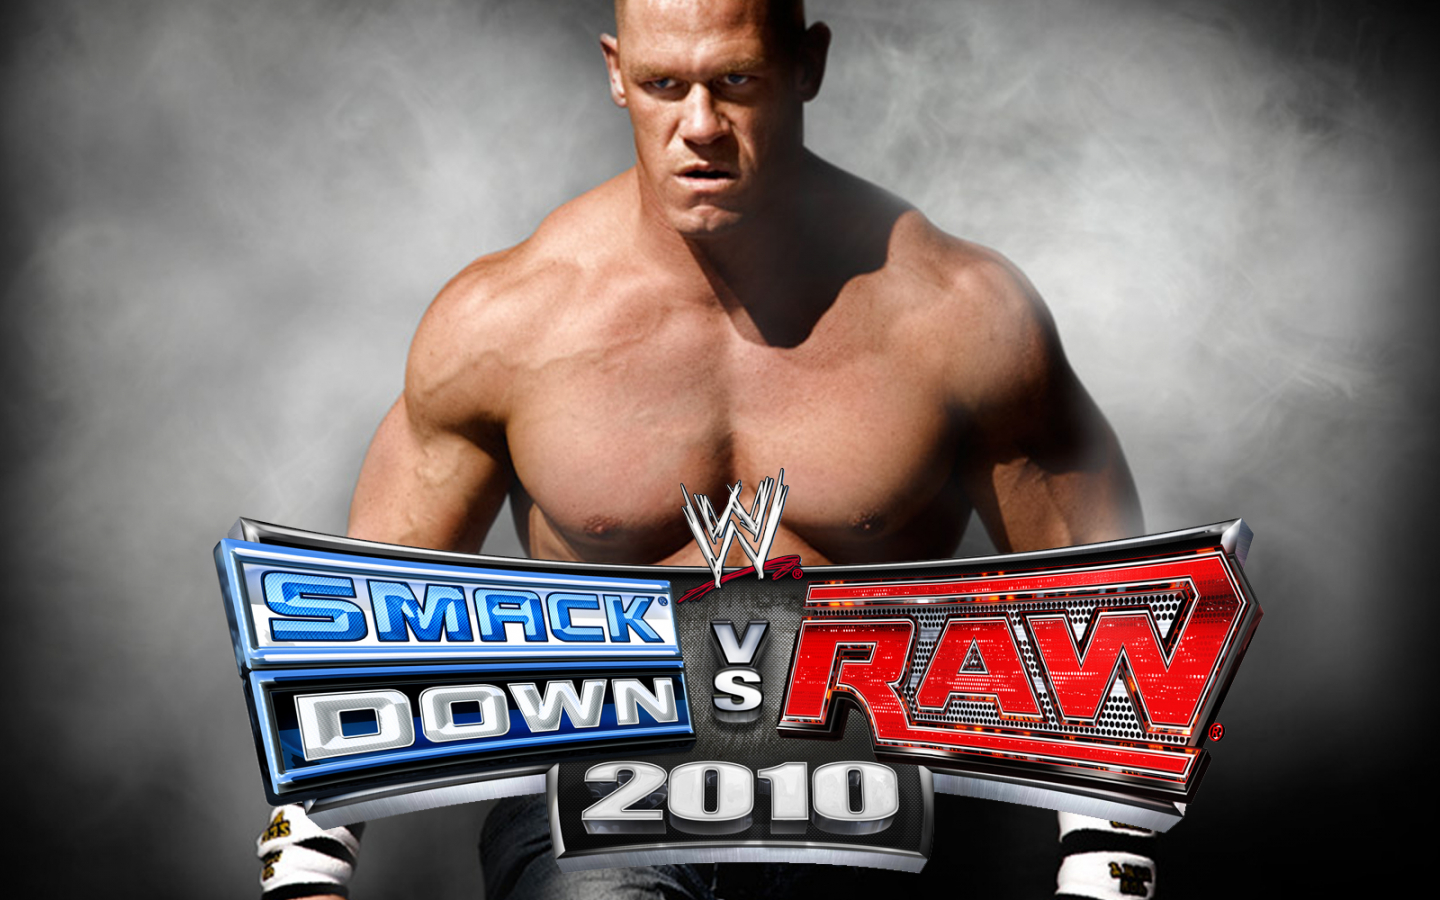 Free download Wallpaper for WWE SmackDown vs RAW 2010 select size 1600x1200 [1600x1200] for your Desktop, Mobile & Tablet. Explore WWE Smackdown vs Raw Wallpaper. WWE Smackdown vs Raw